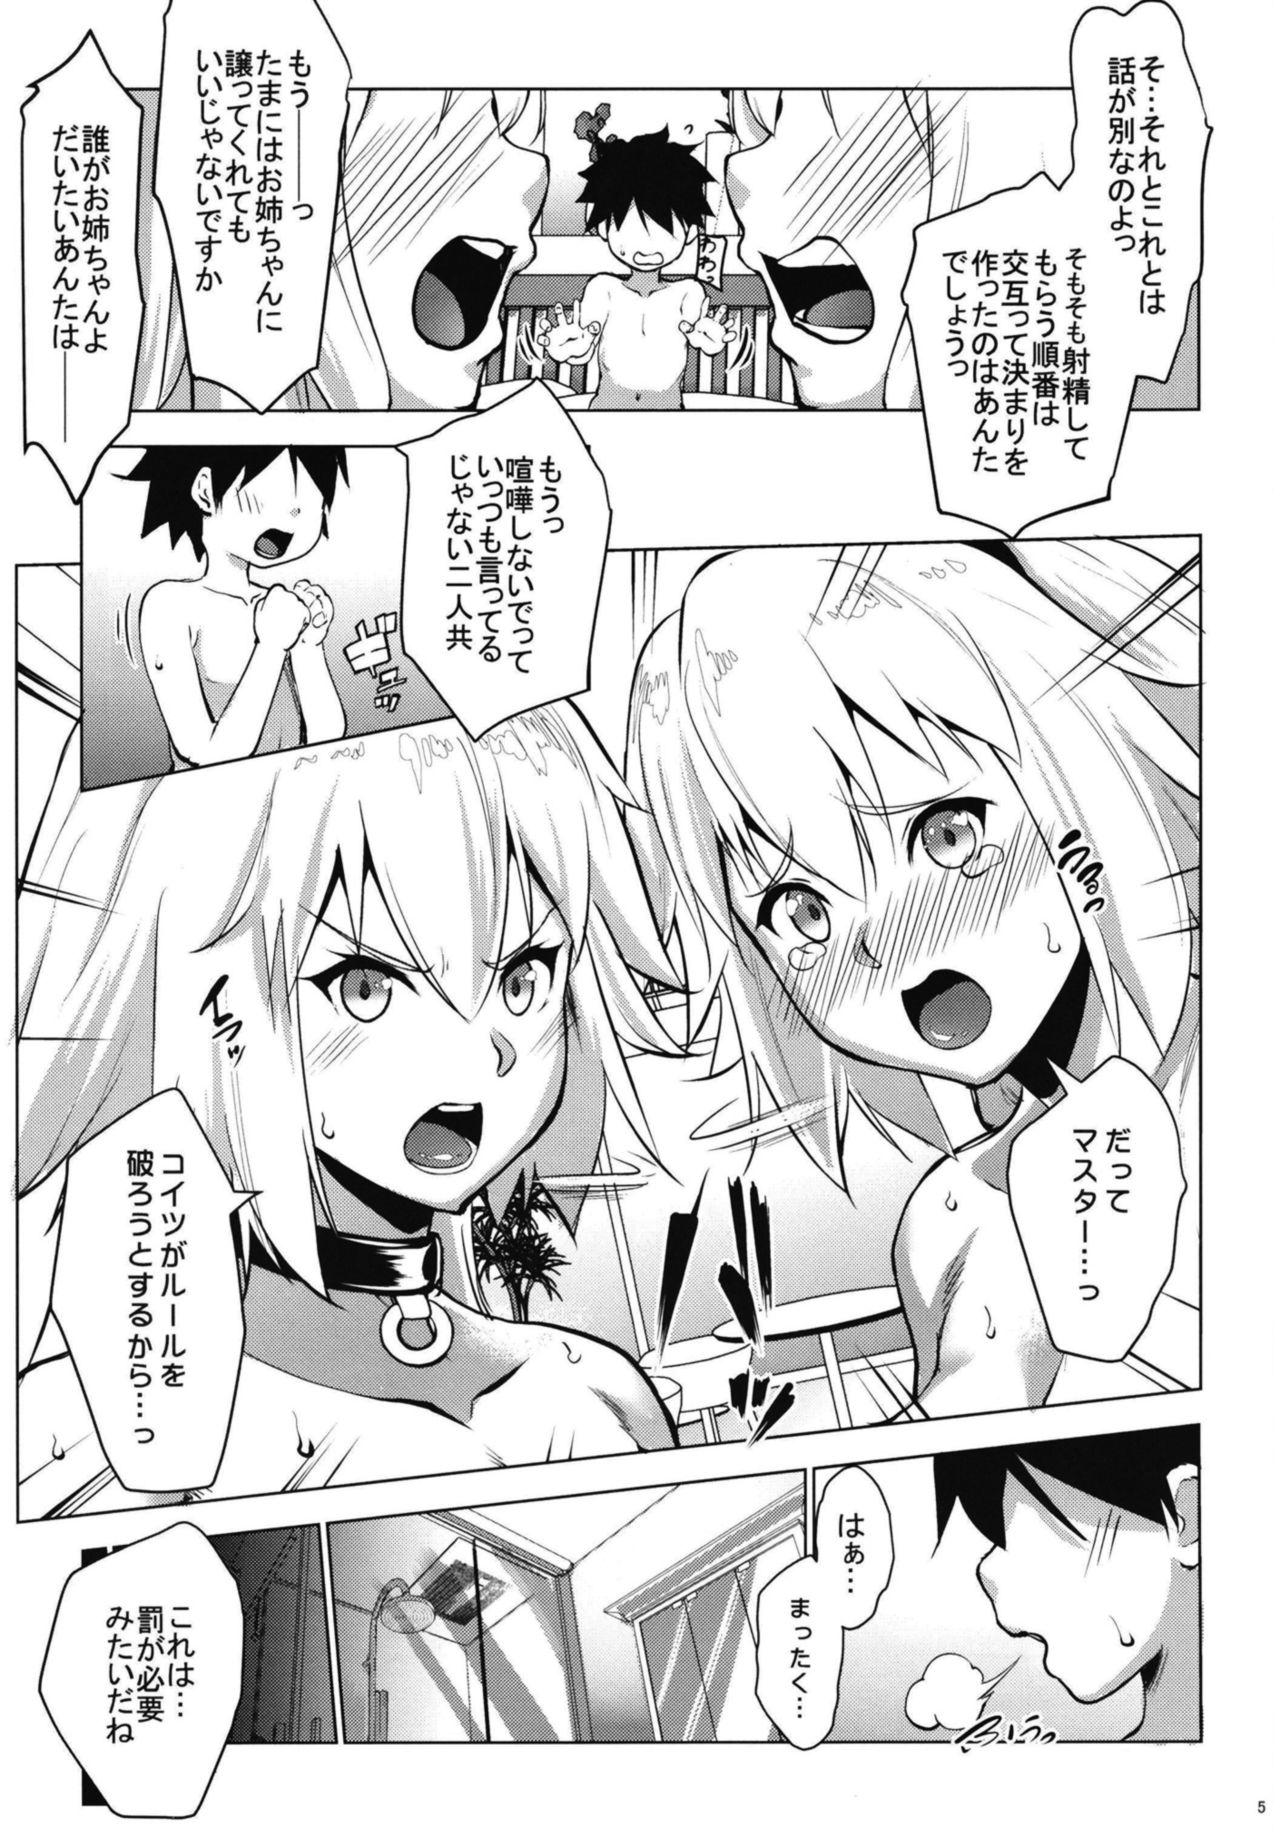 Amateur Obedient Servant Jeanne x Jeanne - Fate grand order Assfucked - Page 5